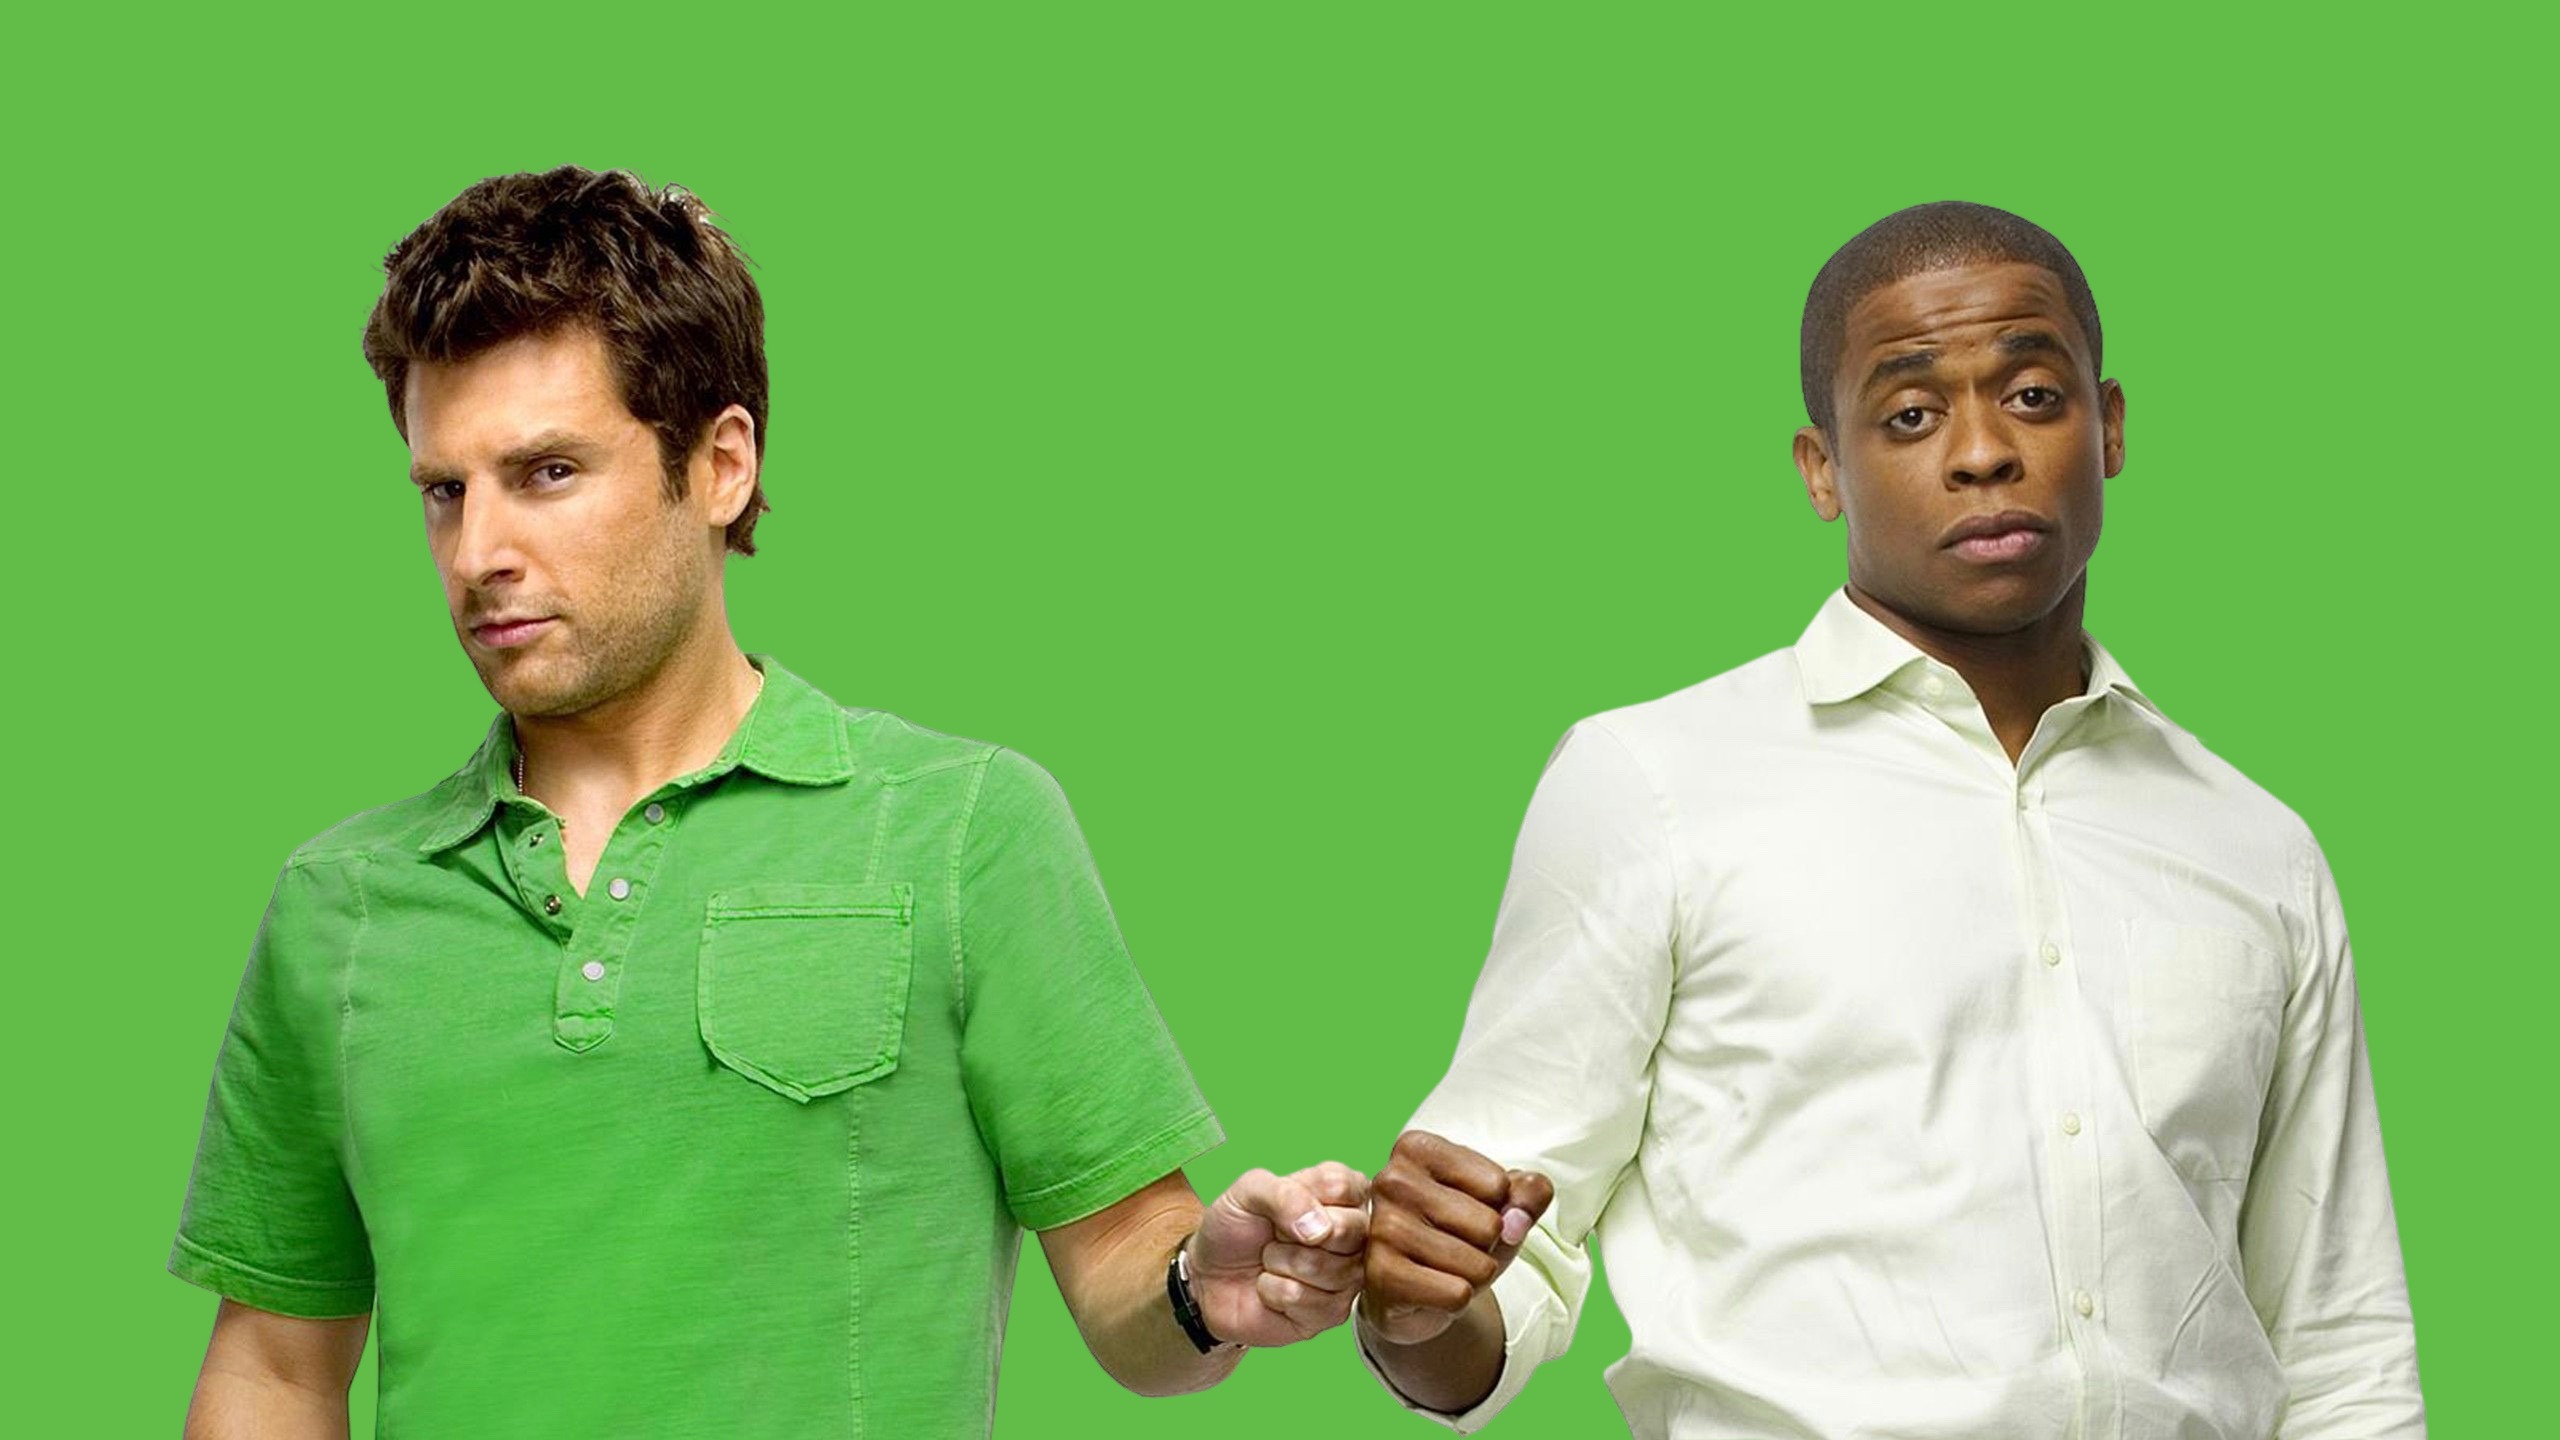 tv show, dulé hill, gus (psych), james roday rodriguez, shawn spencer, psych